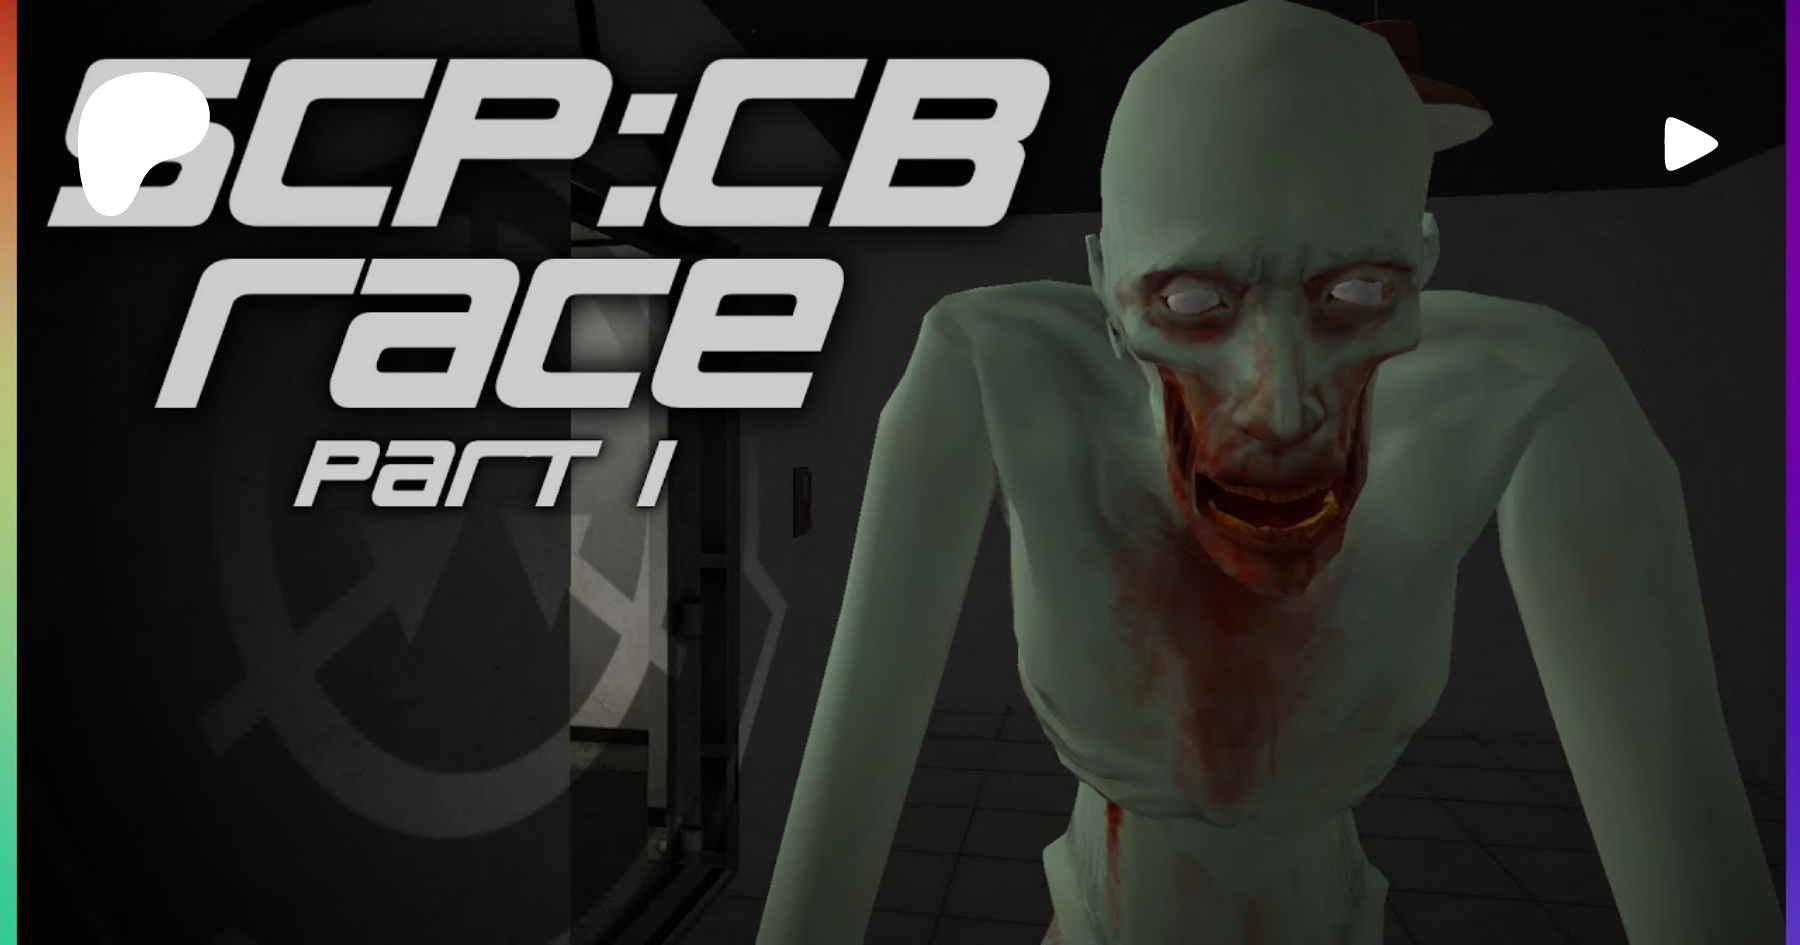 Scp Cb Random Seed Multiplayer Race Feat Malo Part 1